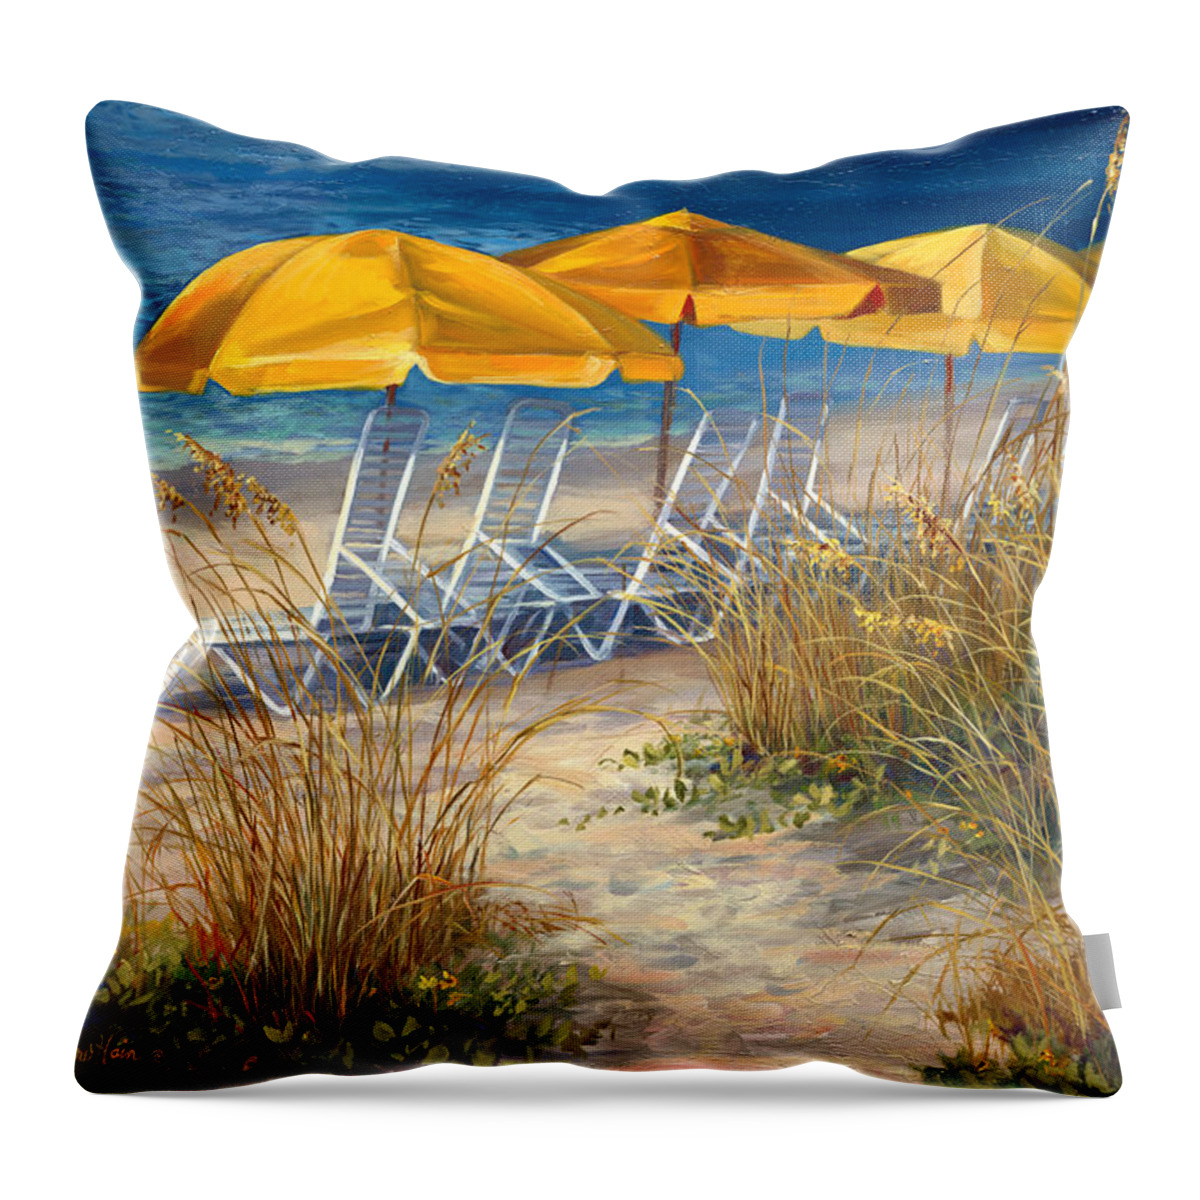 Beach Landscapes Throw Pillow featuring the painting Sunbrellas by Laurie Snow Hein